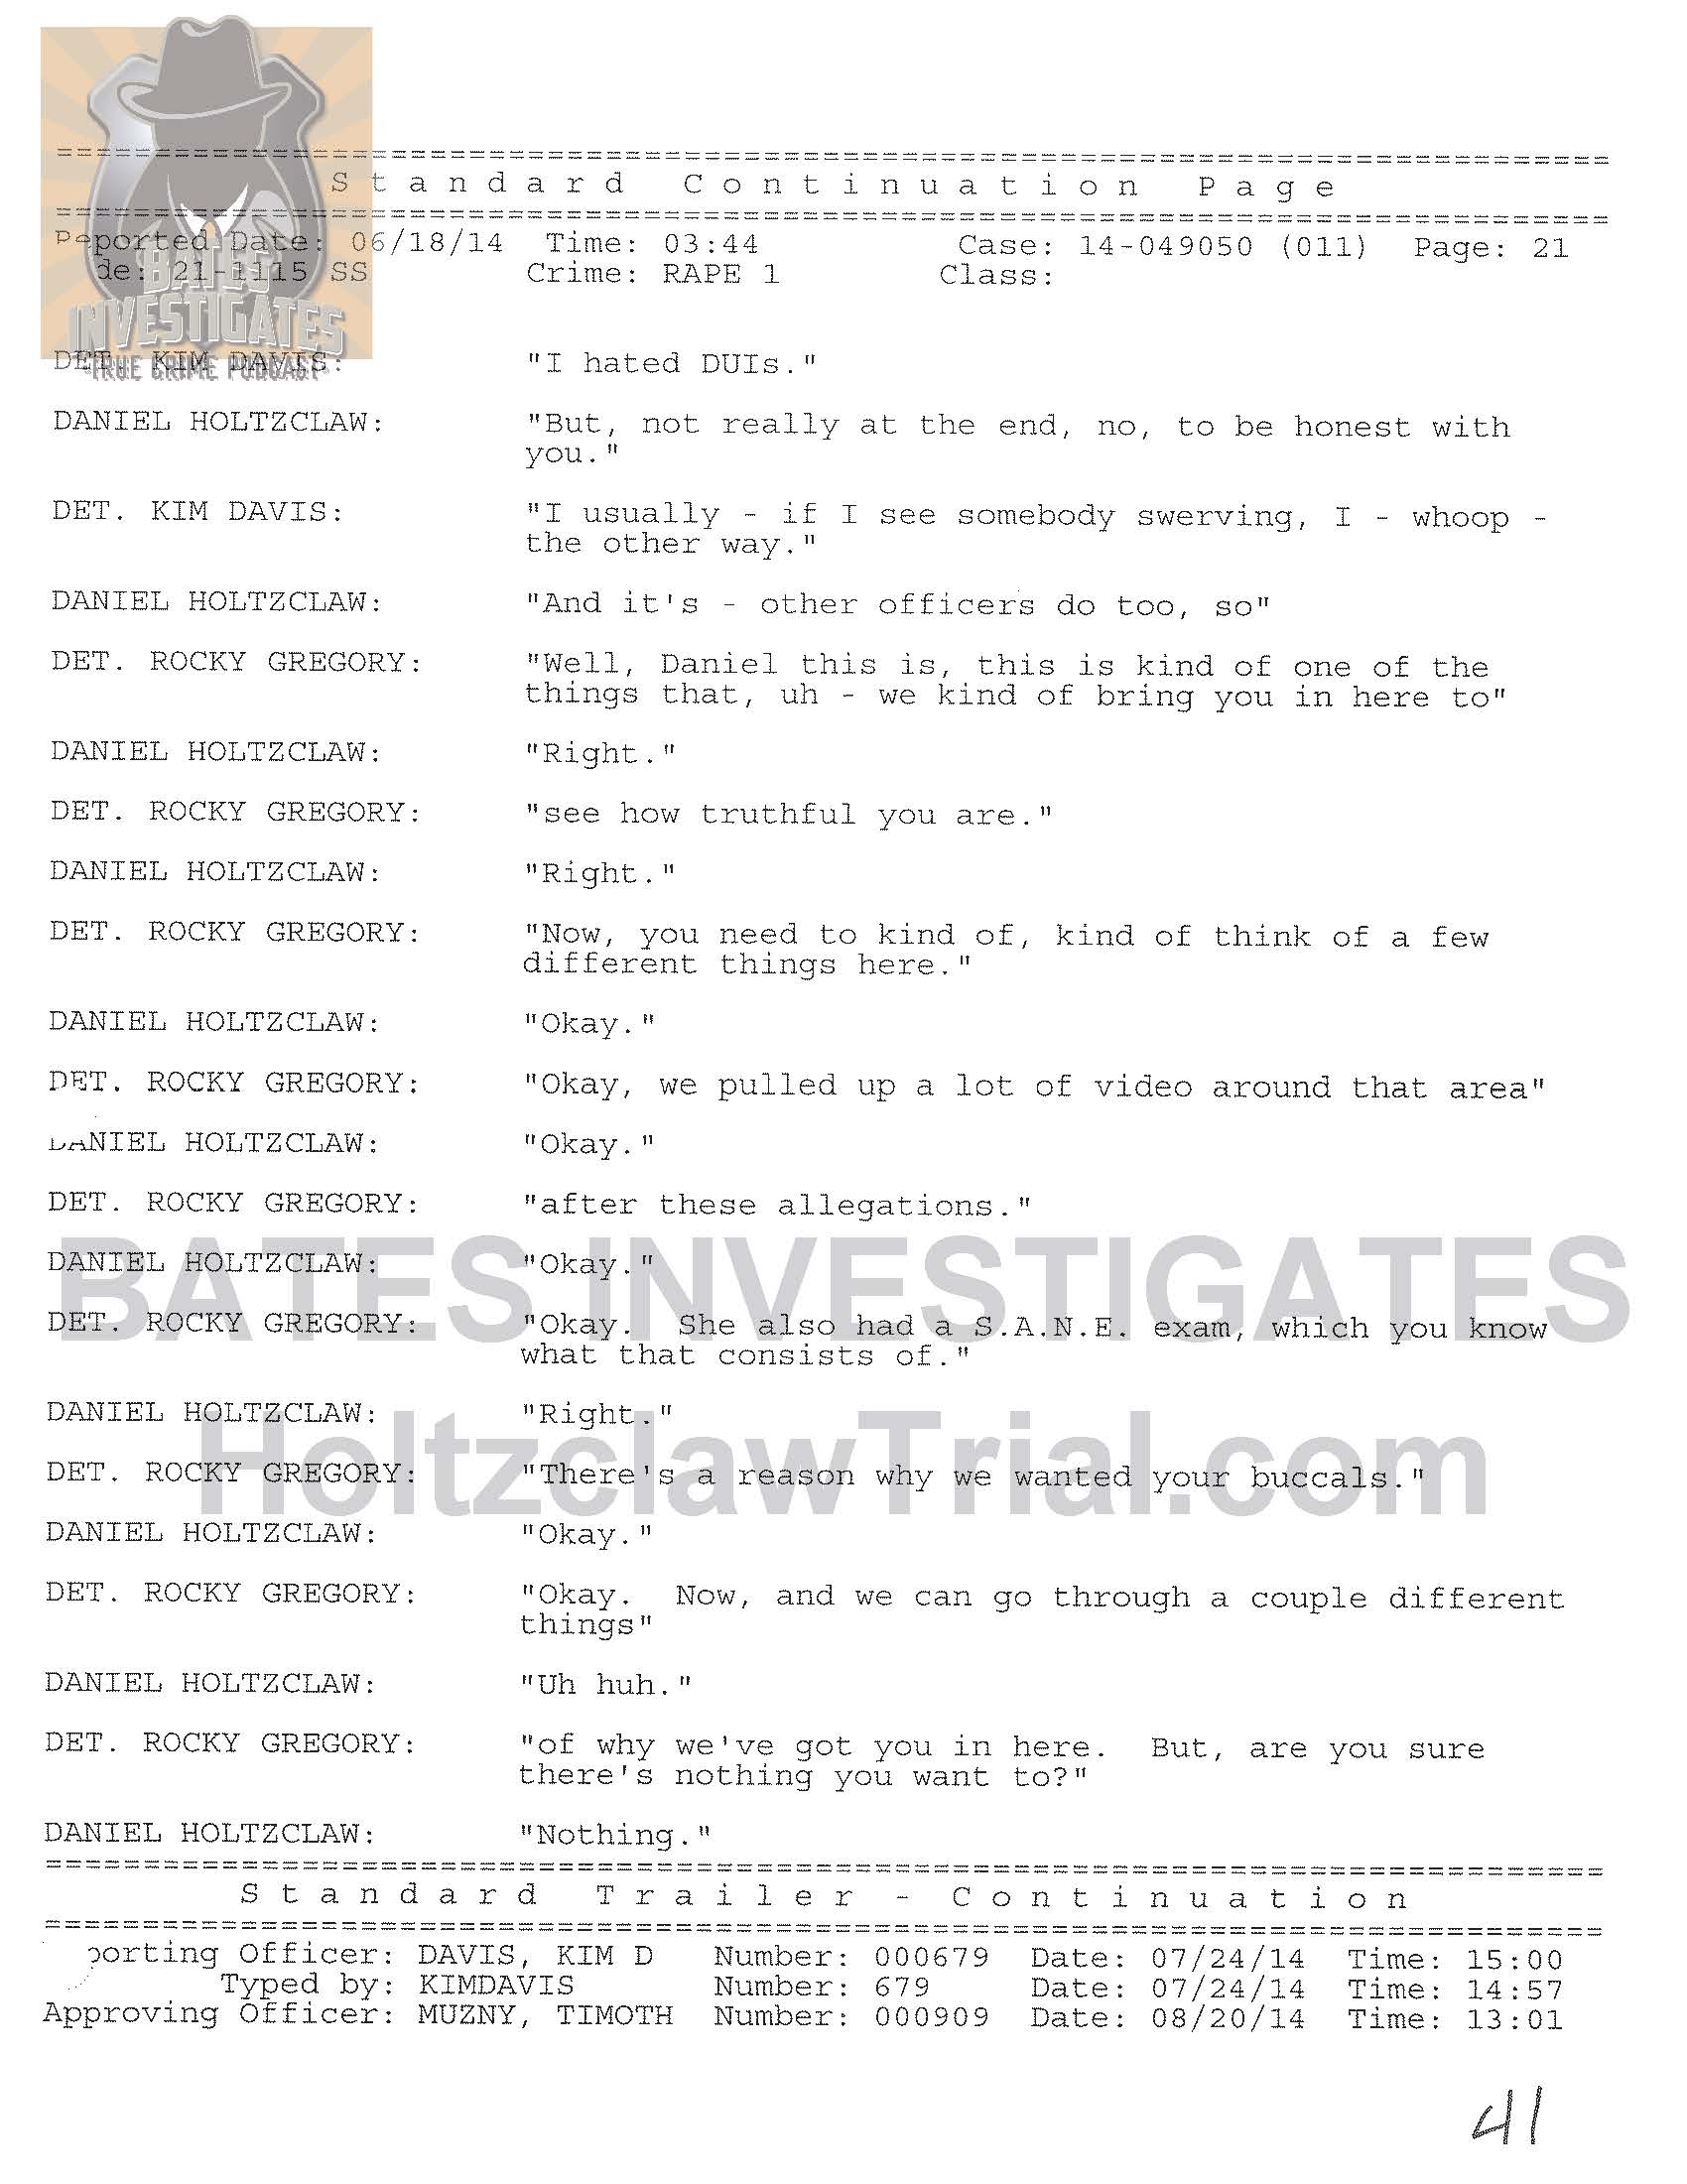 Holtzclaw Interrogation Transcript - Ep02 Redacted_Page_21.jpg